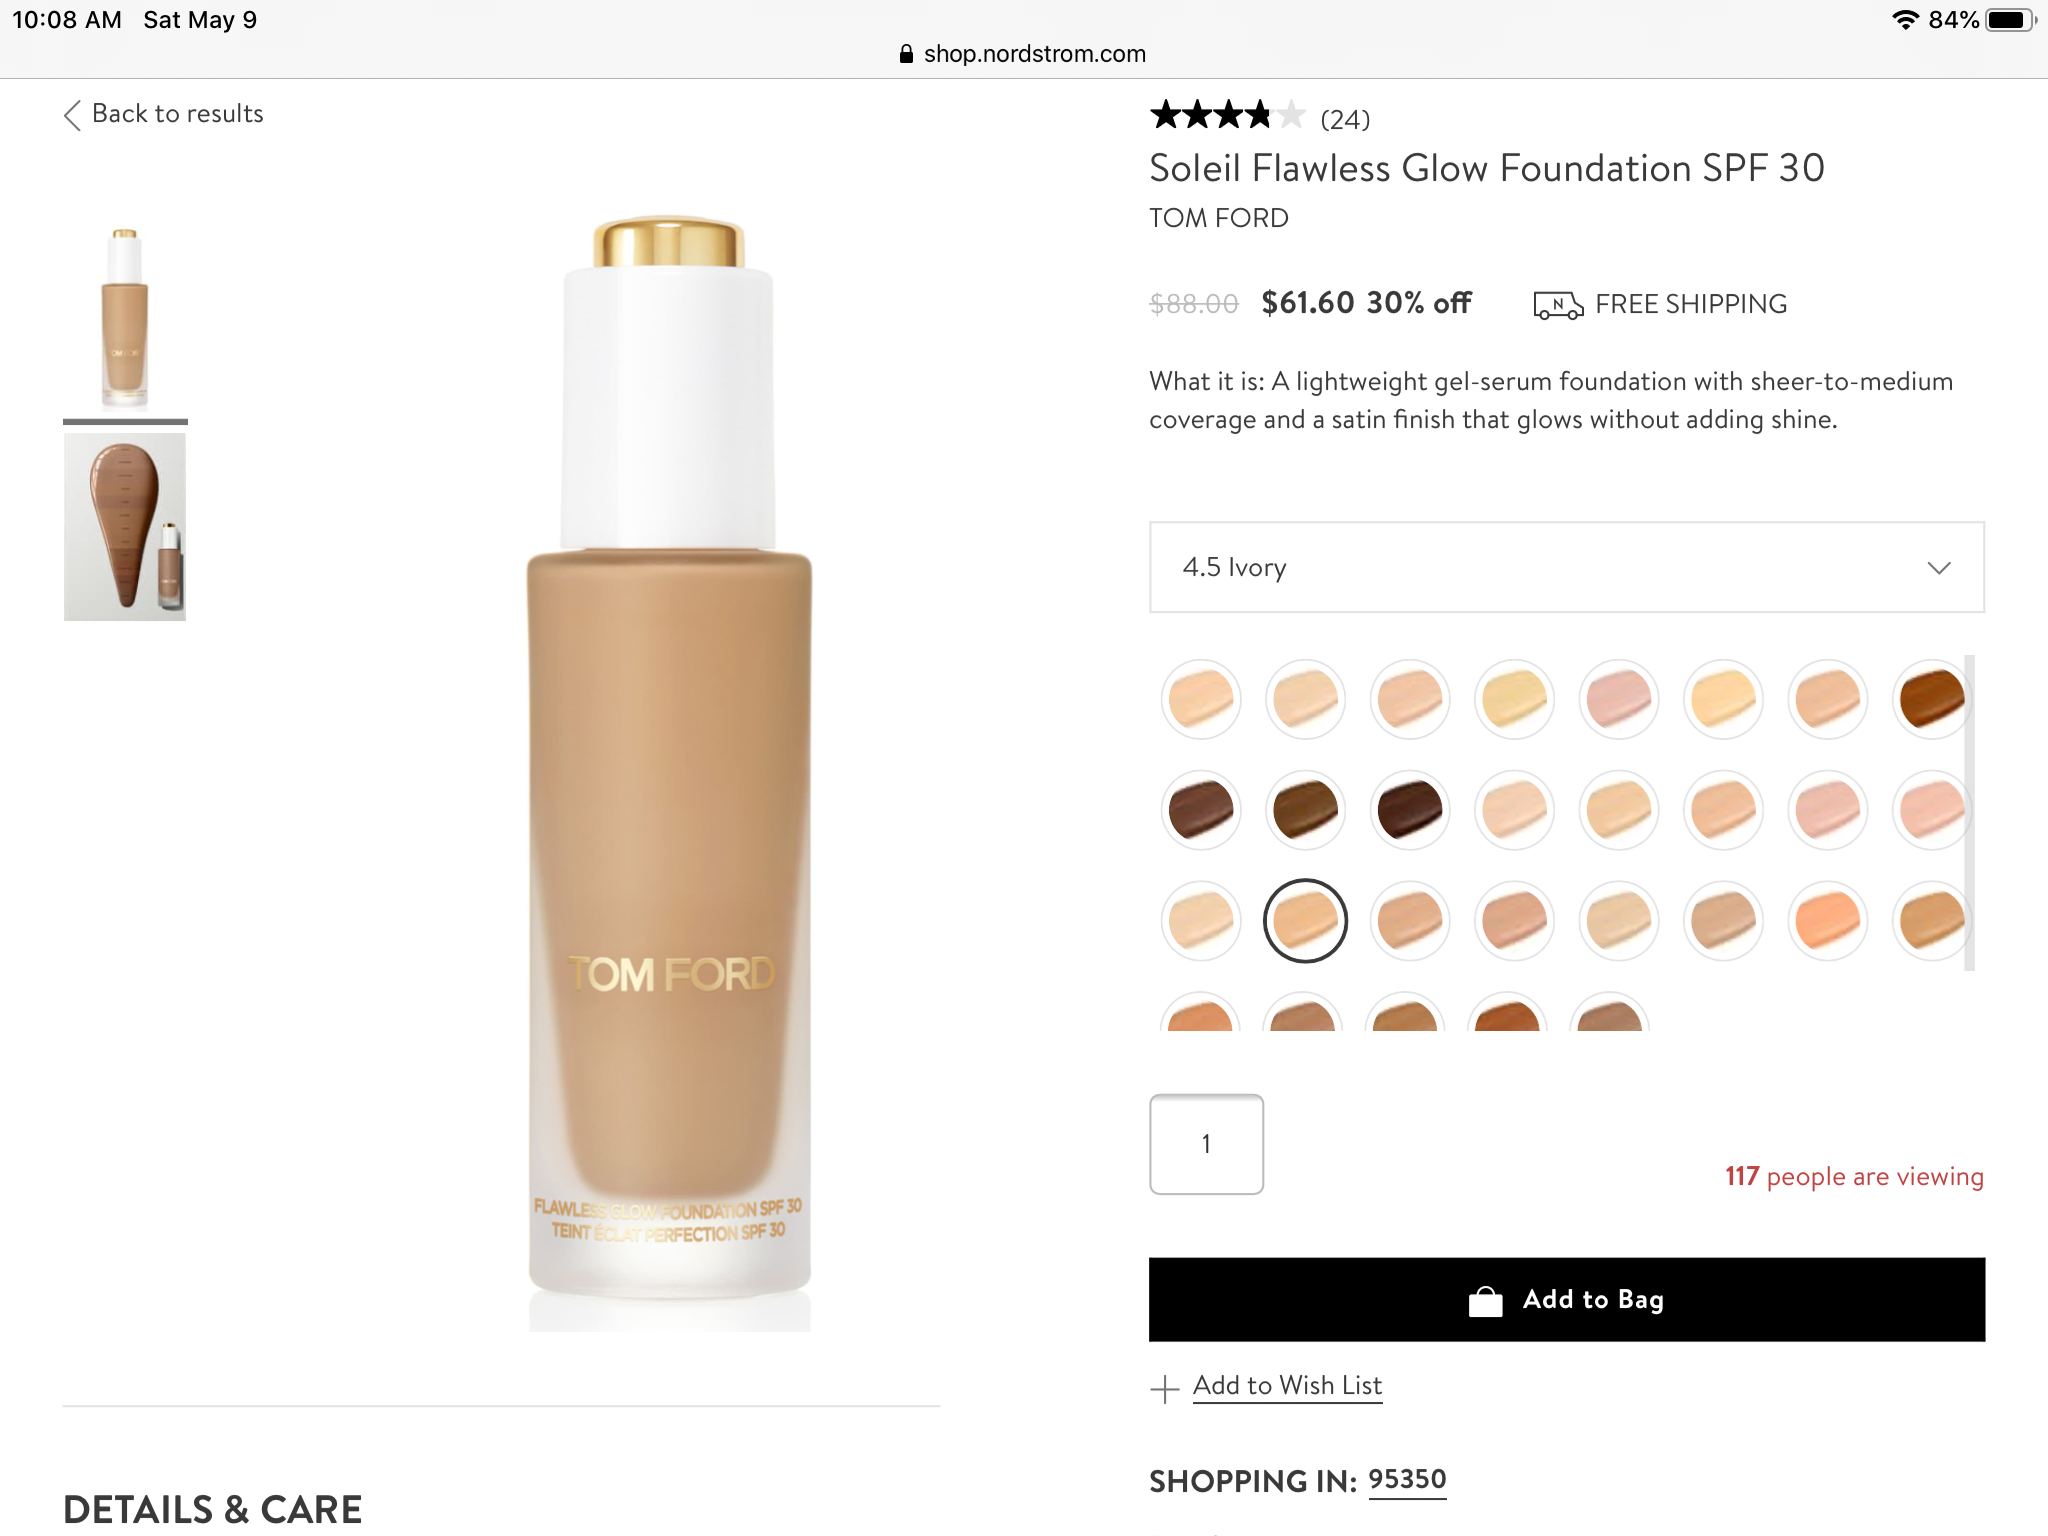 Re: Tom Ford Updates - Page 50 - Beauty Insider Community